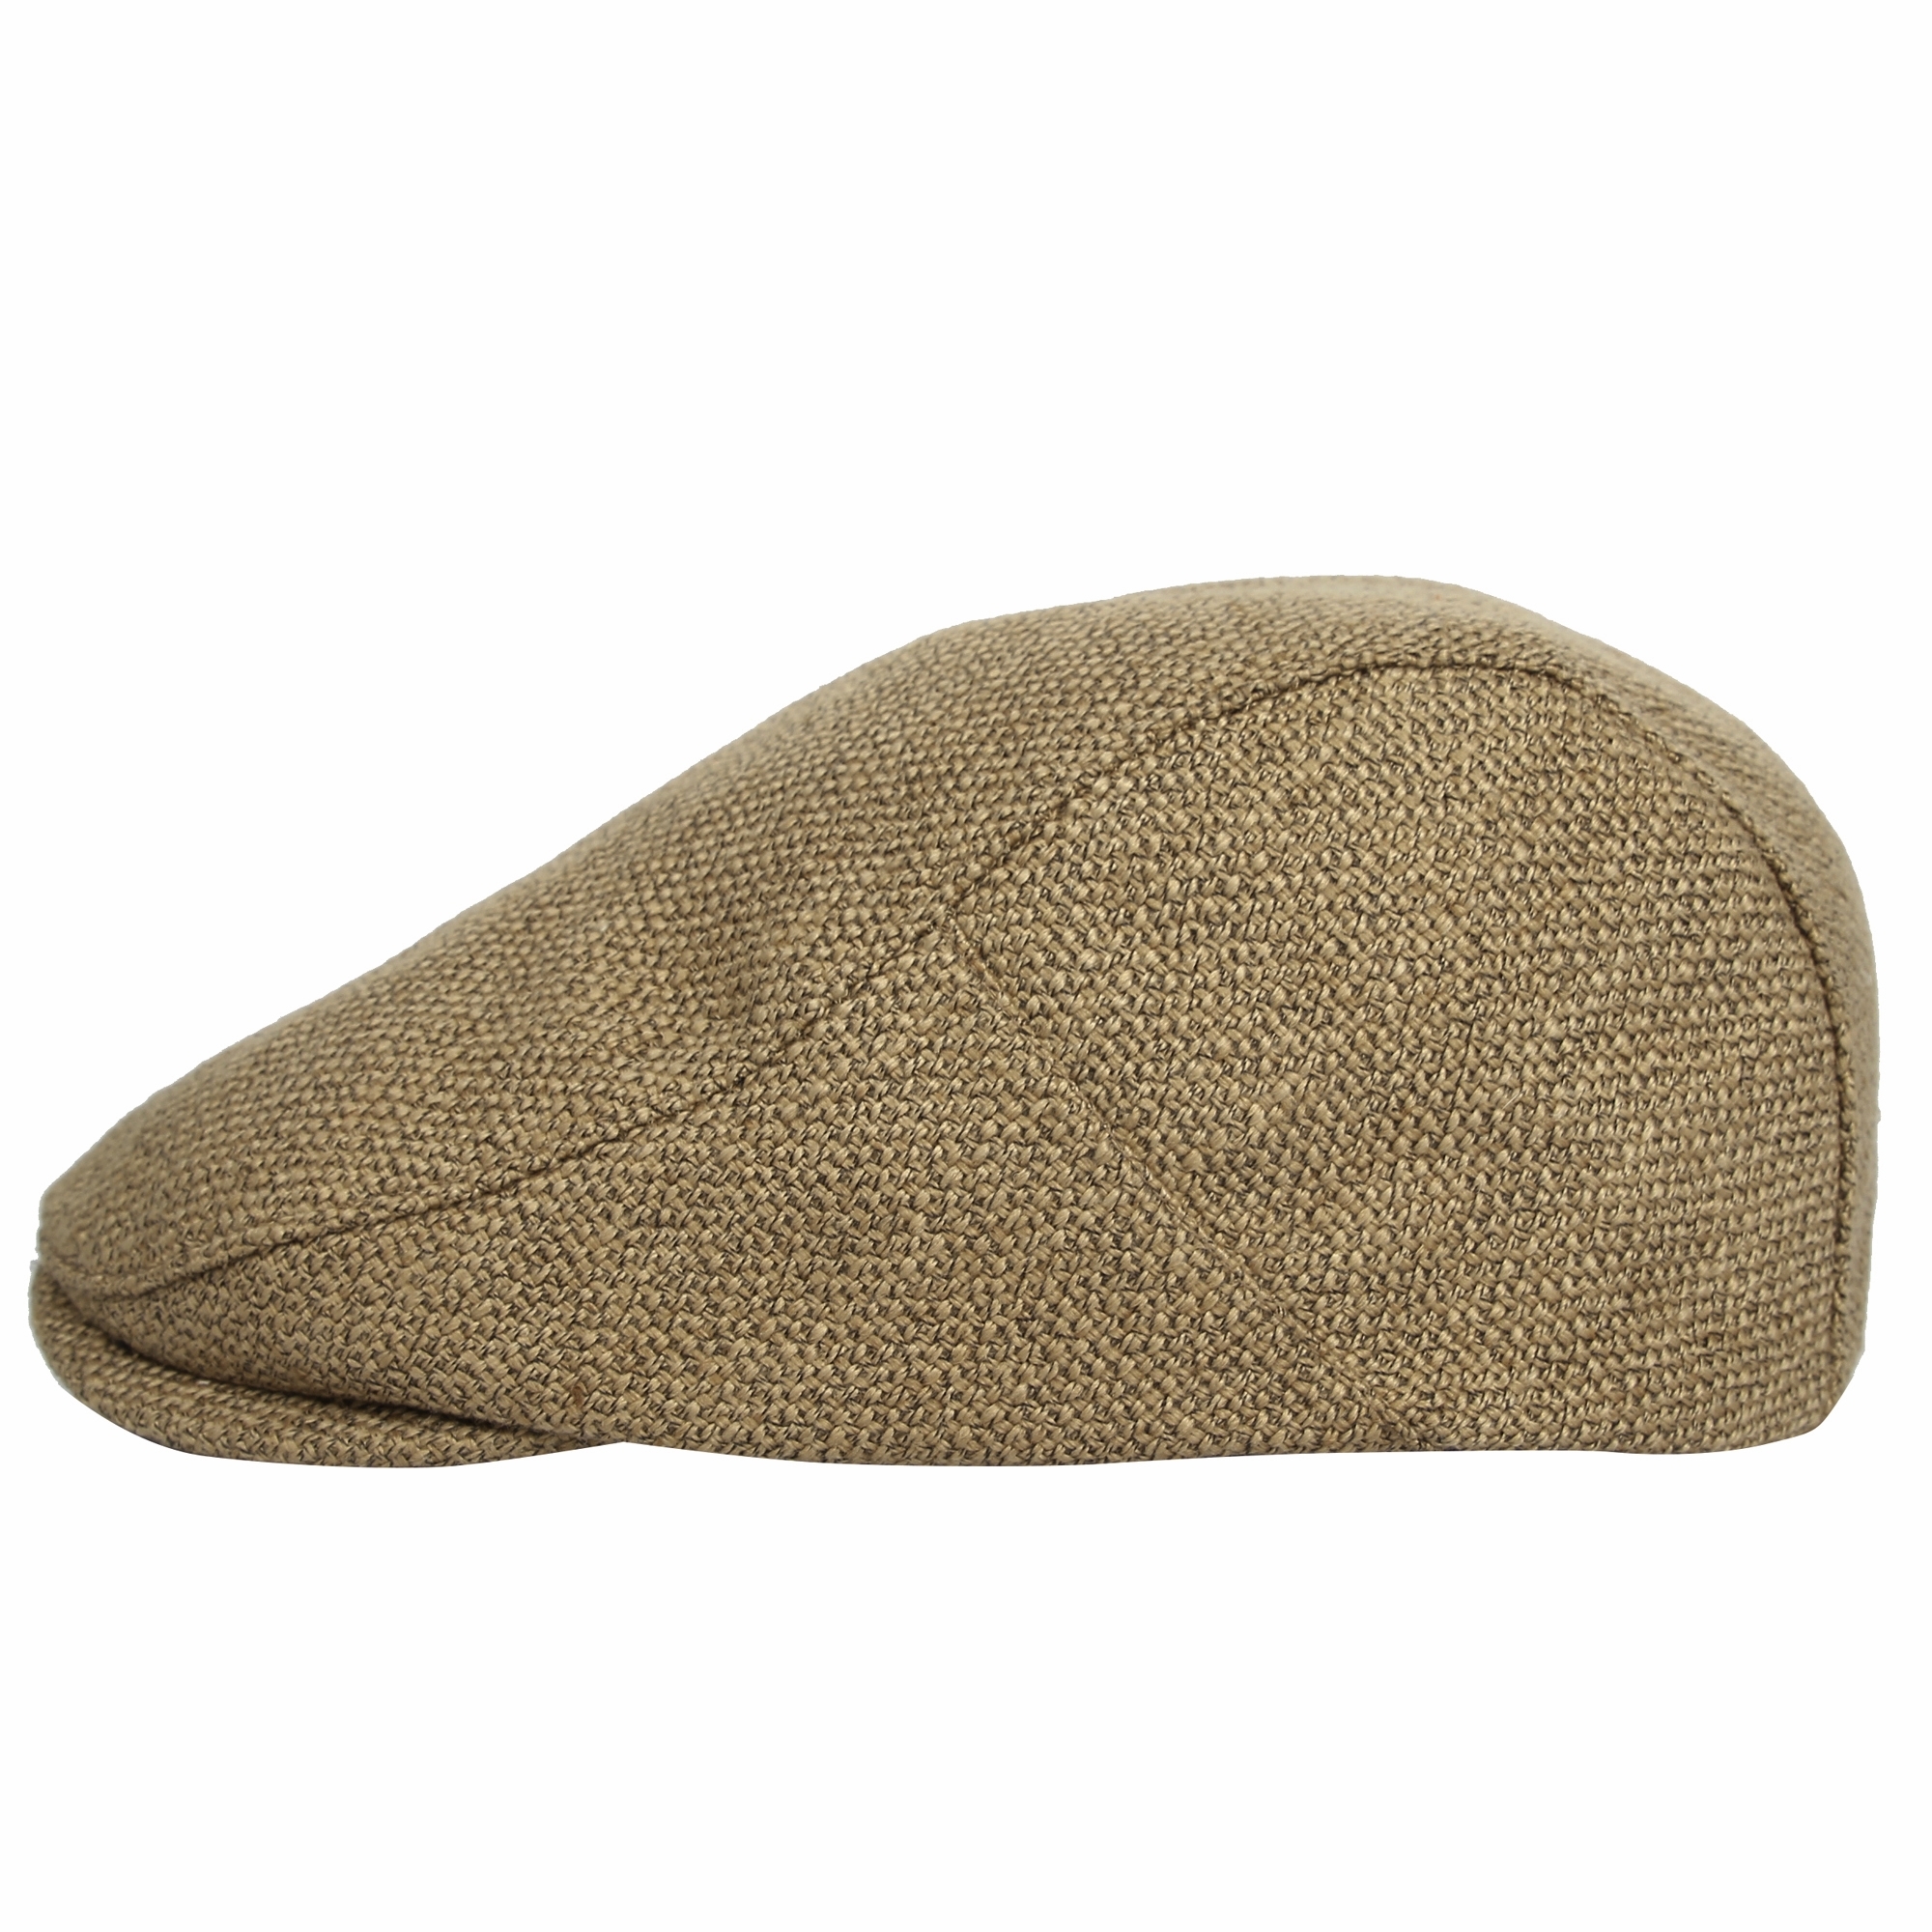 WITHMOONS Ivy Cap Straw Weave Linen-Like Cotton Cabbie Newsboy Hat ...